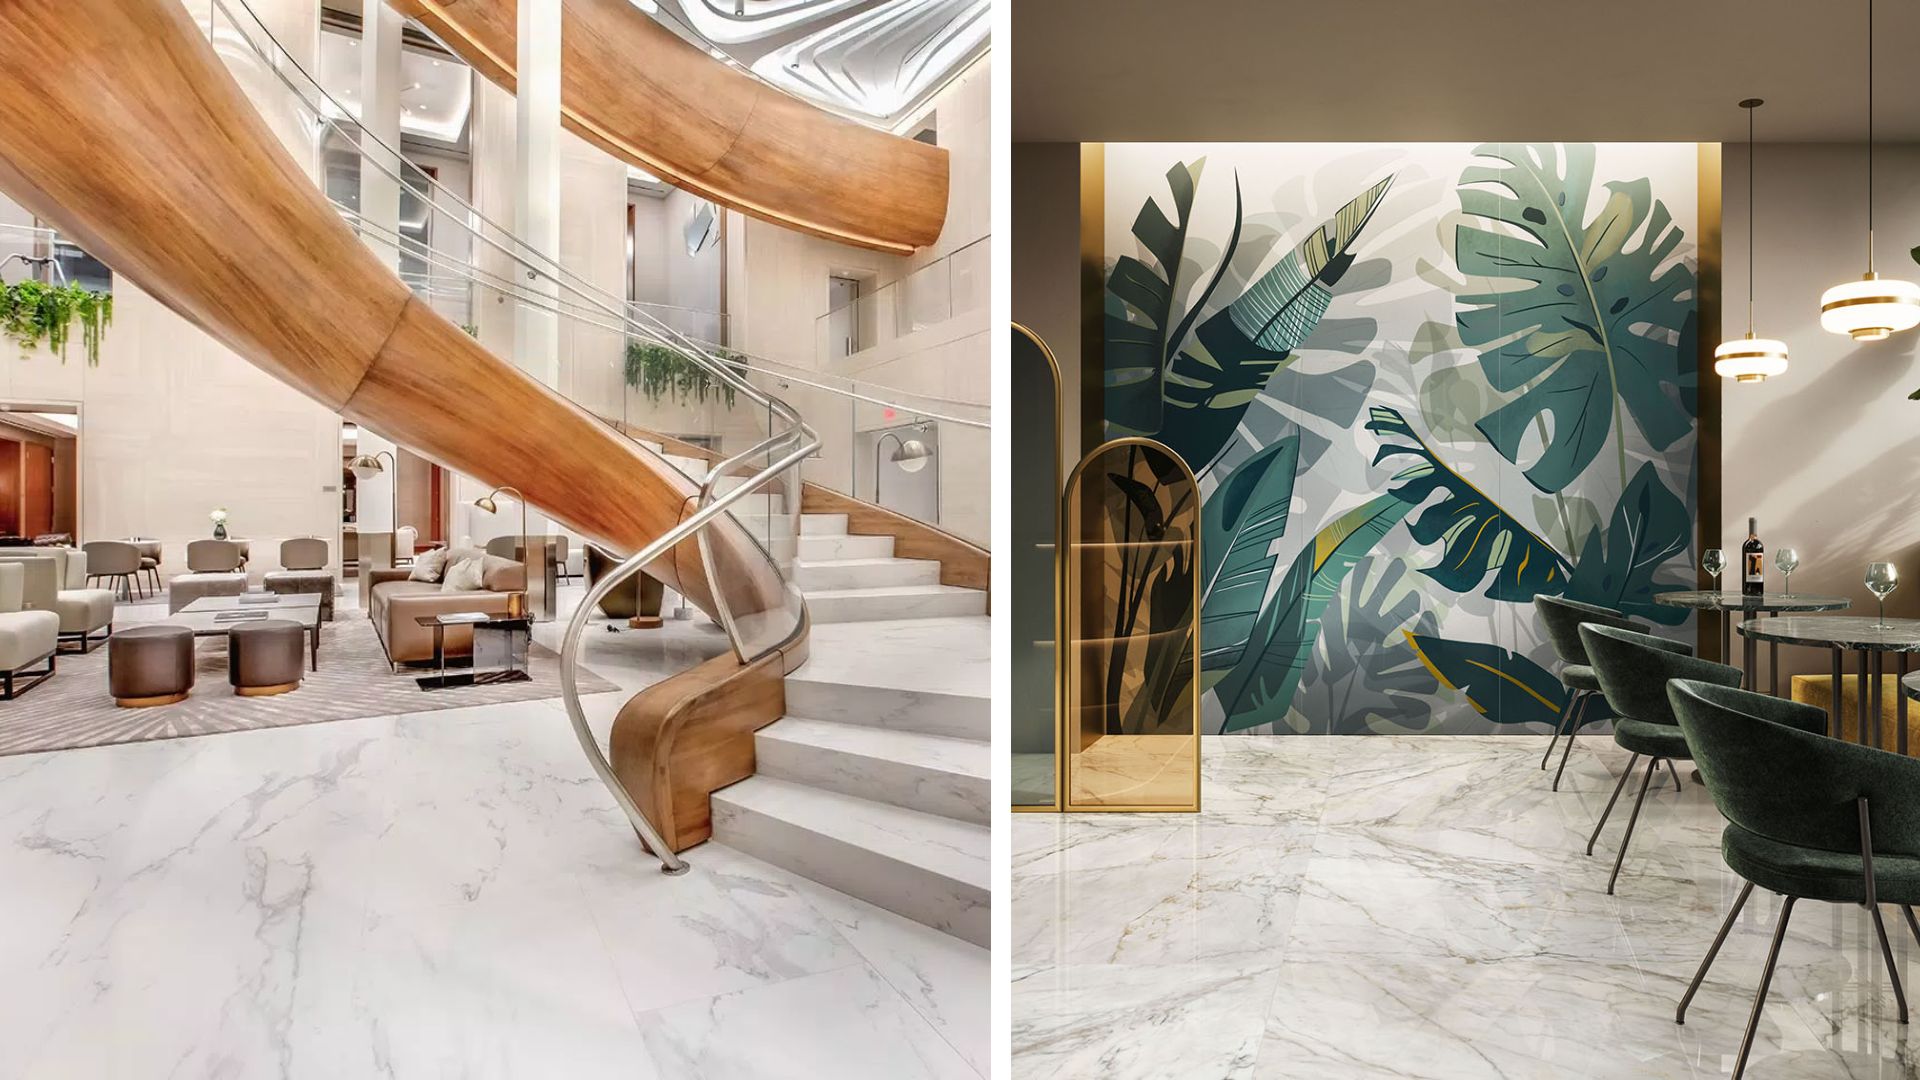 Two examples of Amenity spaces. Left side photo shows a high end apartment wellness space. A white marble visual is featured on the floor and stairs. The right side photo shows Cotto D'este Wonderwall Botany installed in a restaurant setting.